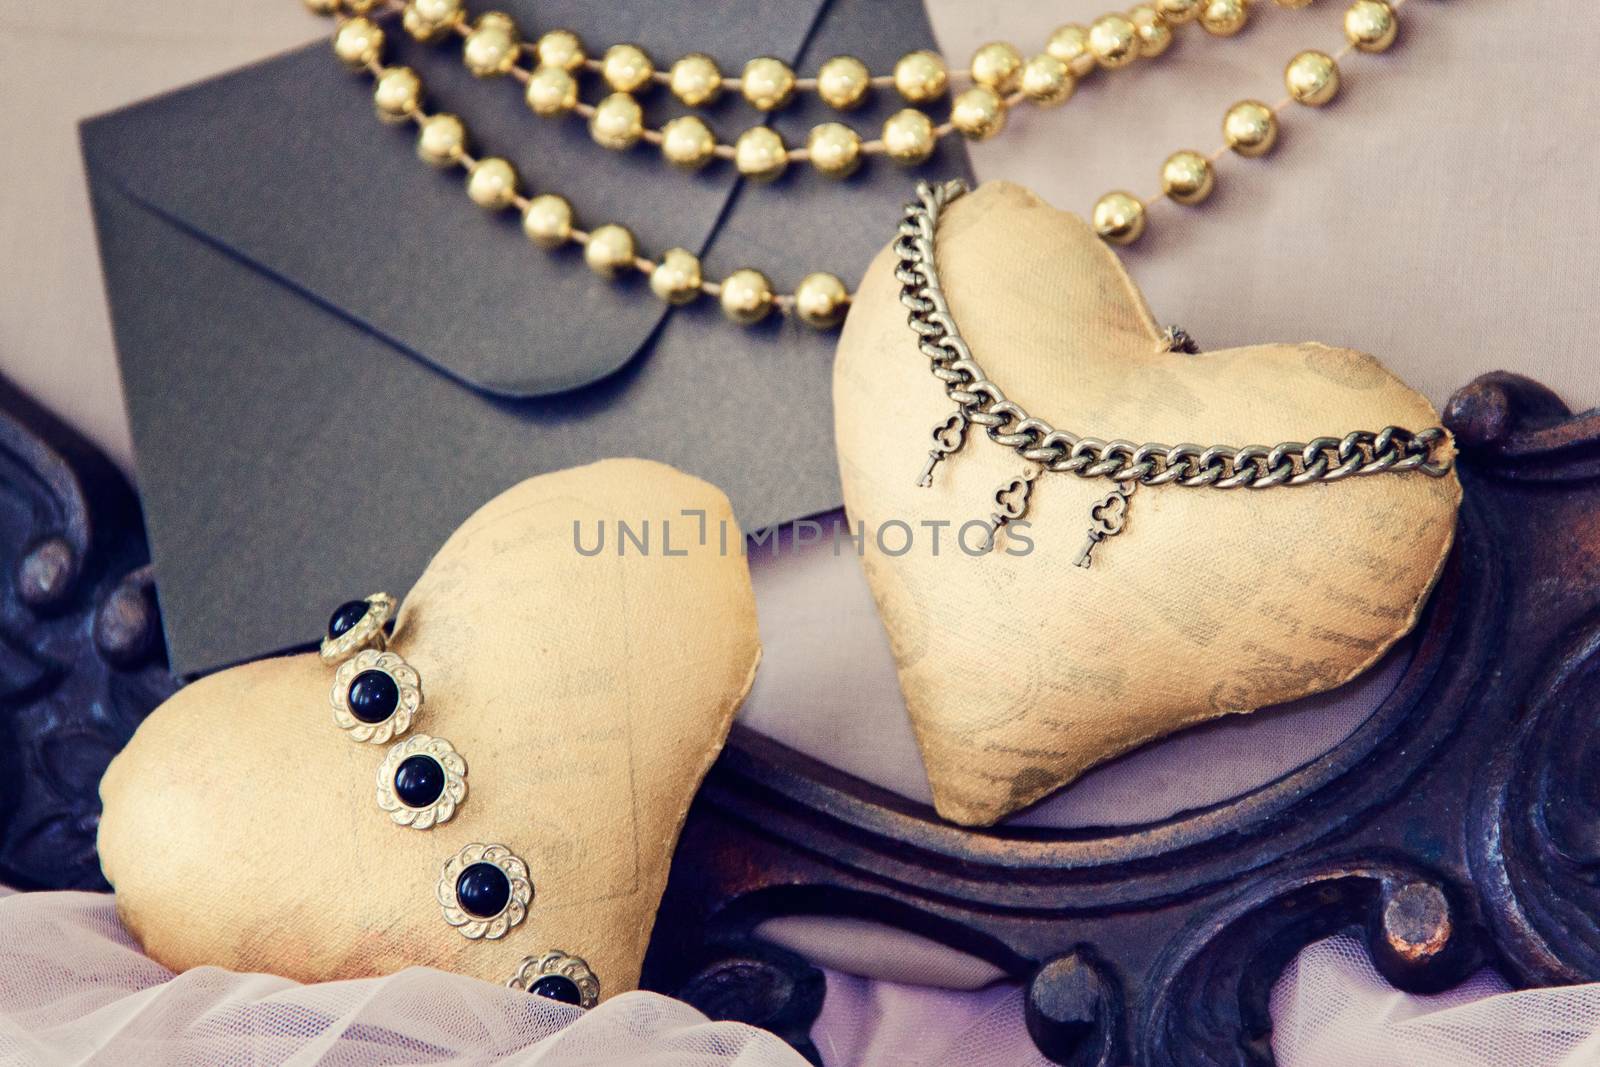 Vintage background with hearts for Valentine's day. Handmade. photo. by Irinavk